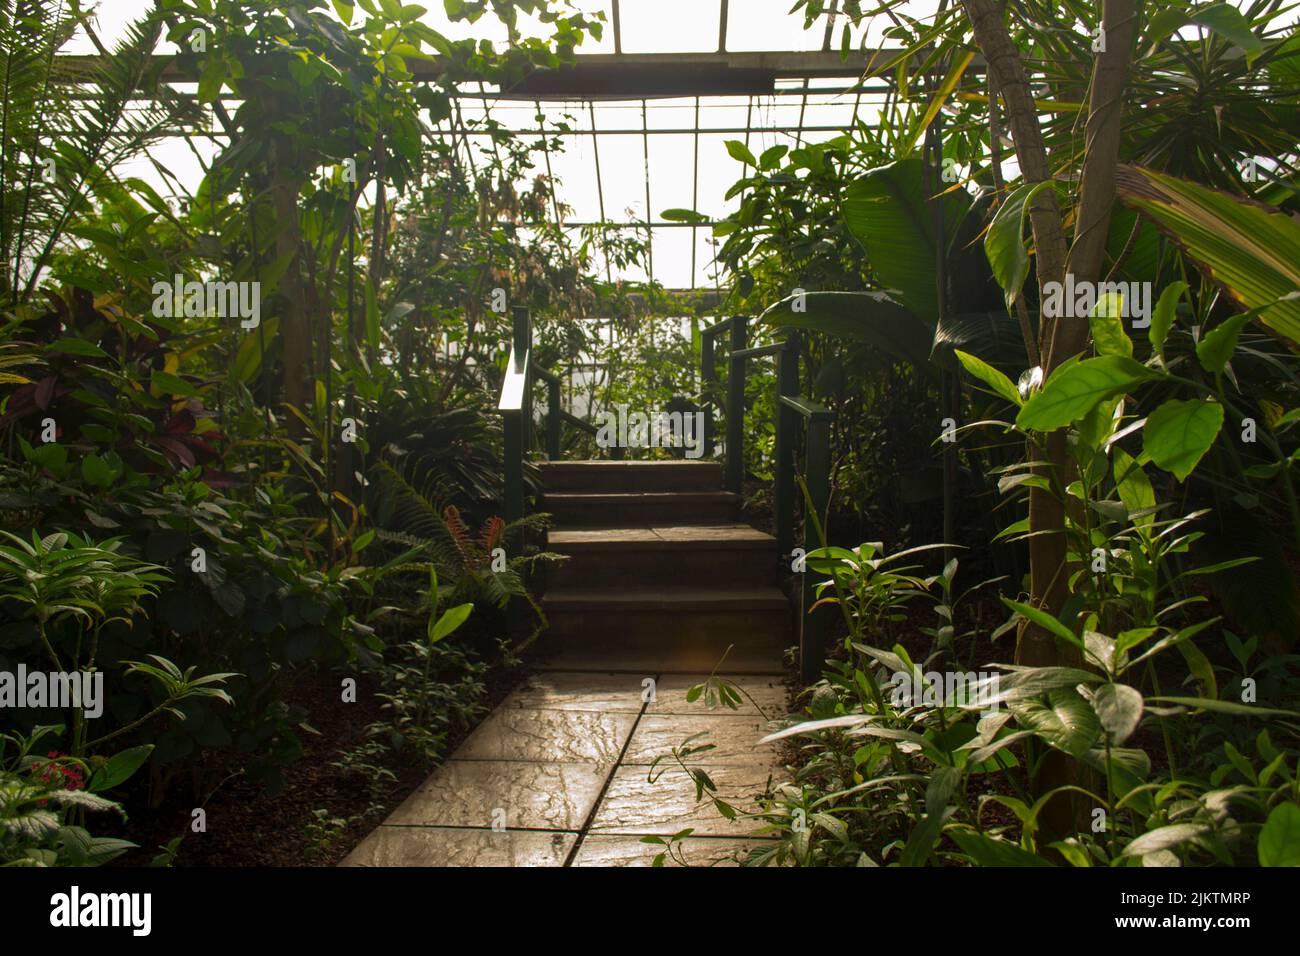 A scenic view of a trail between green plants and trees in a greenhouse Stock Photo